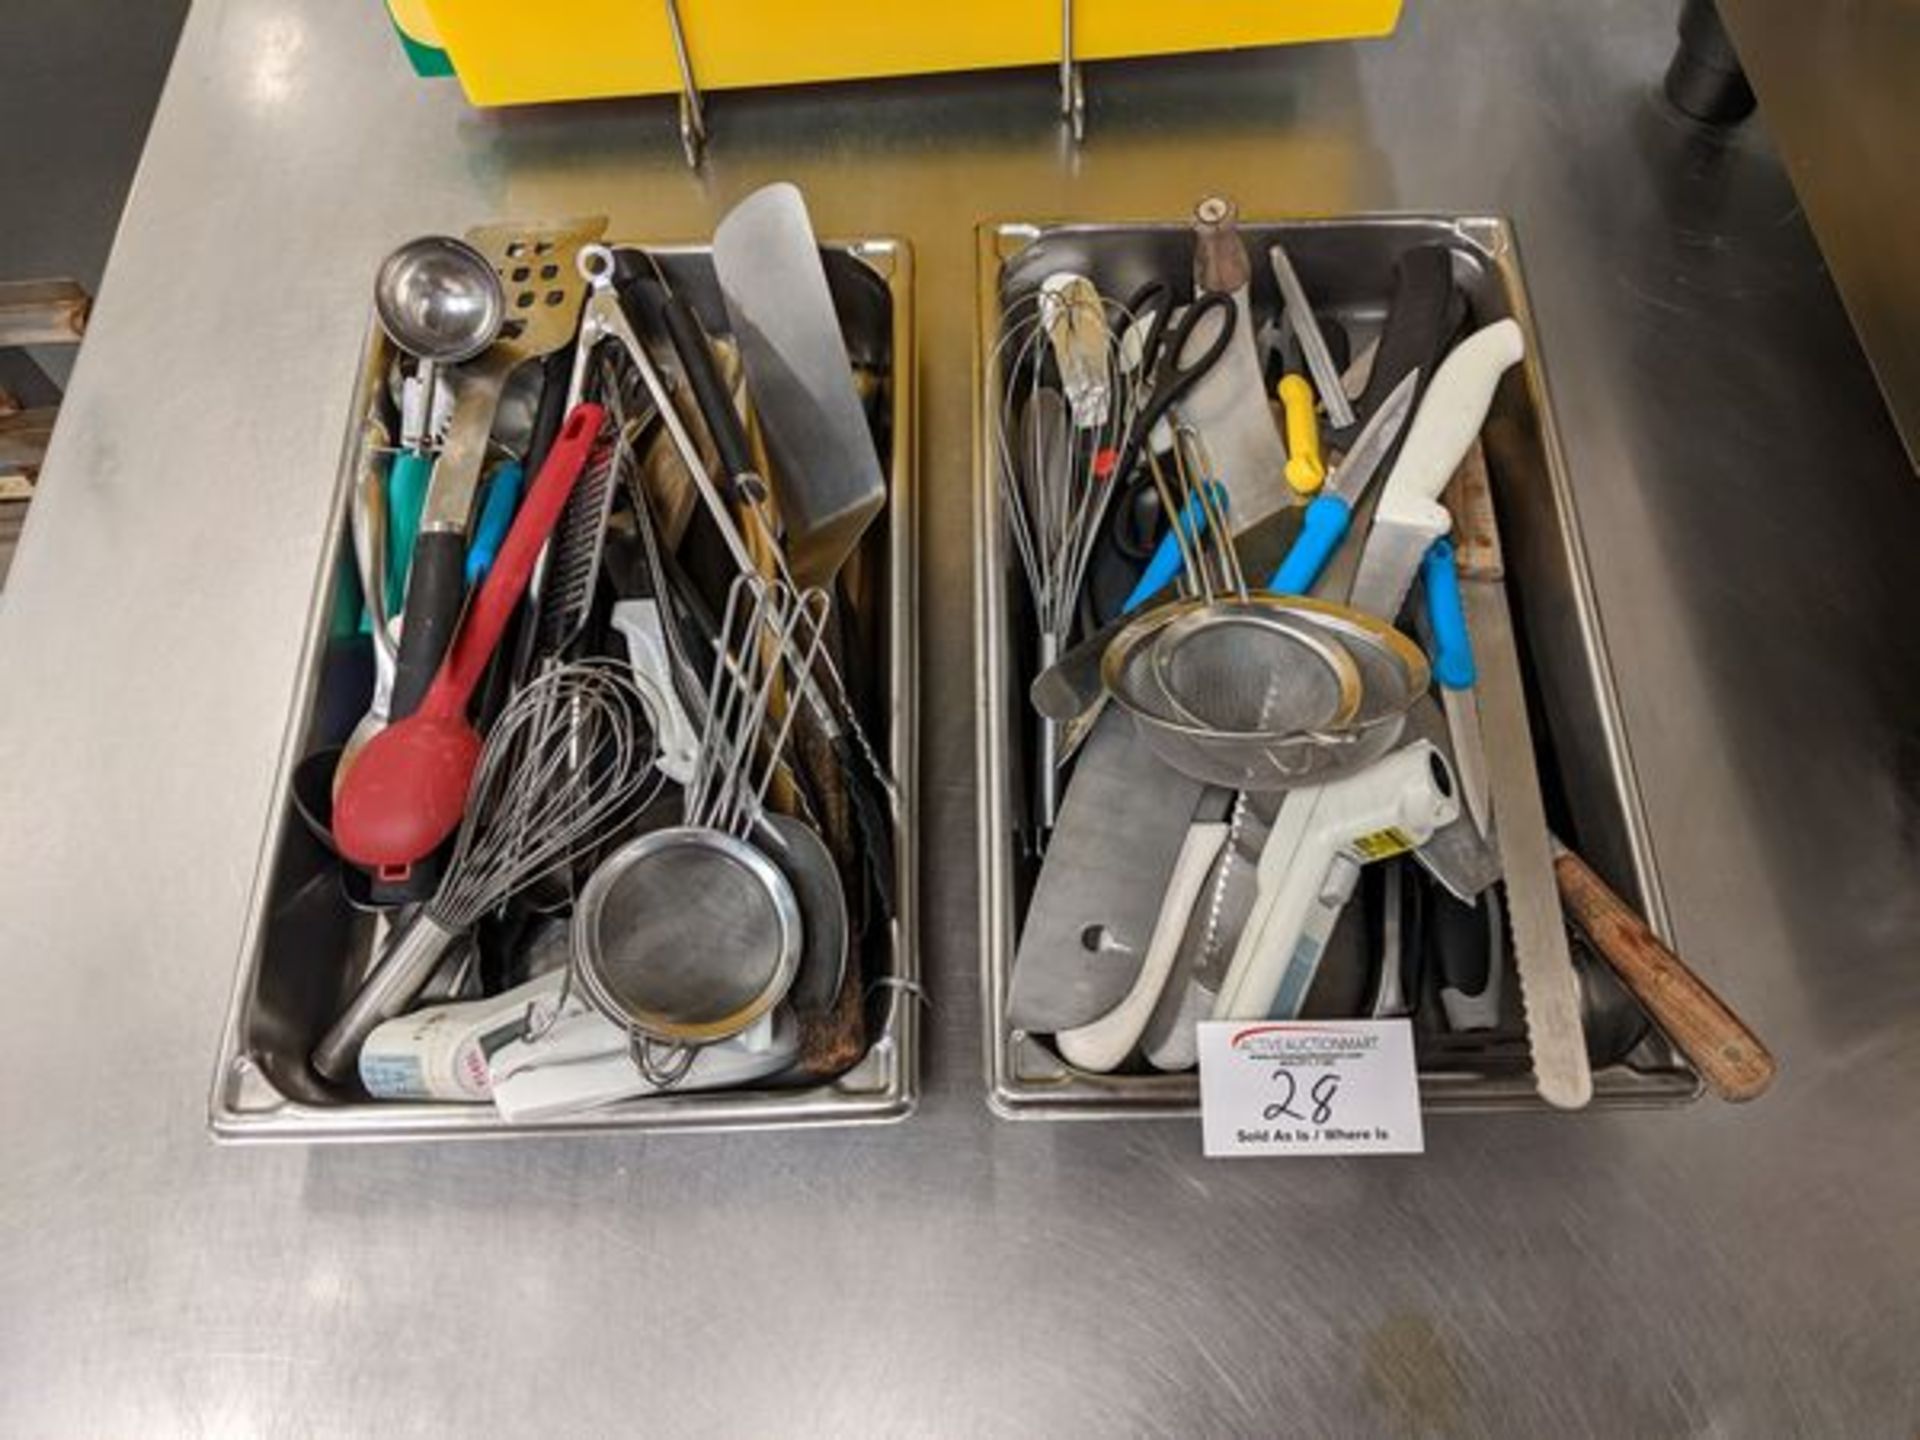 2 Trays of Assorted Utensils and Knives